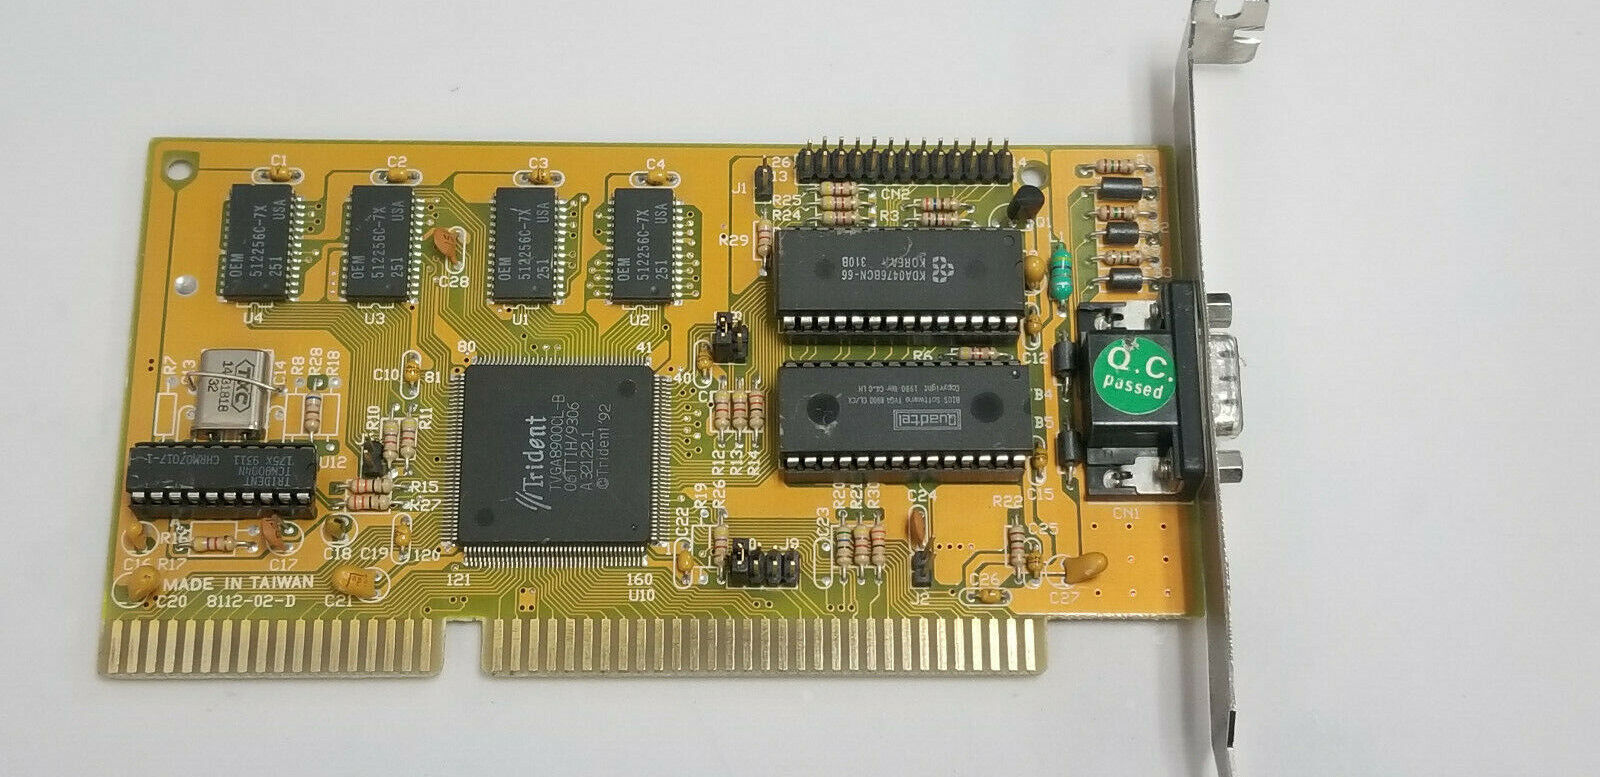 Trident 8900C ISA 16 1MB VGA Video Card for DOS Retro Gaming used working #Y2C